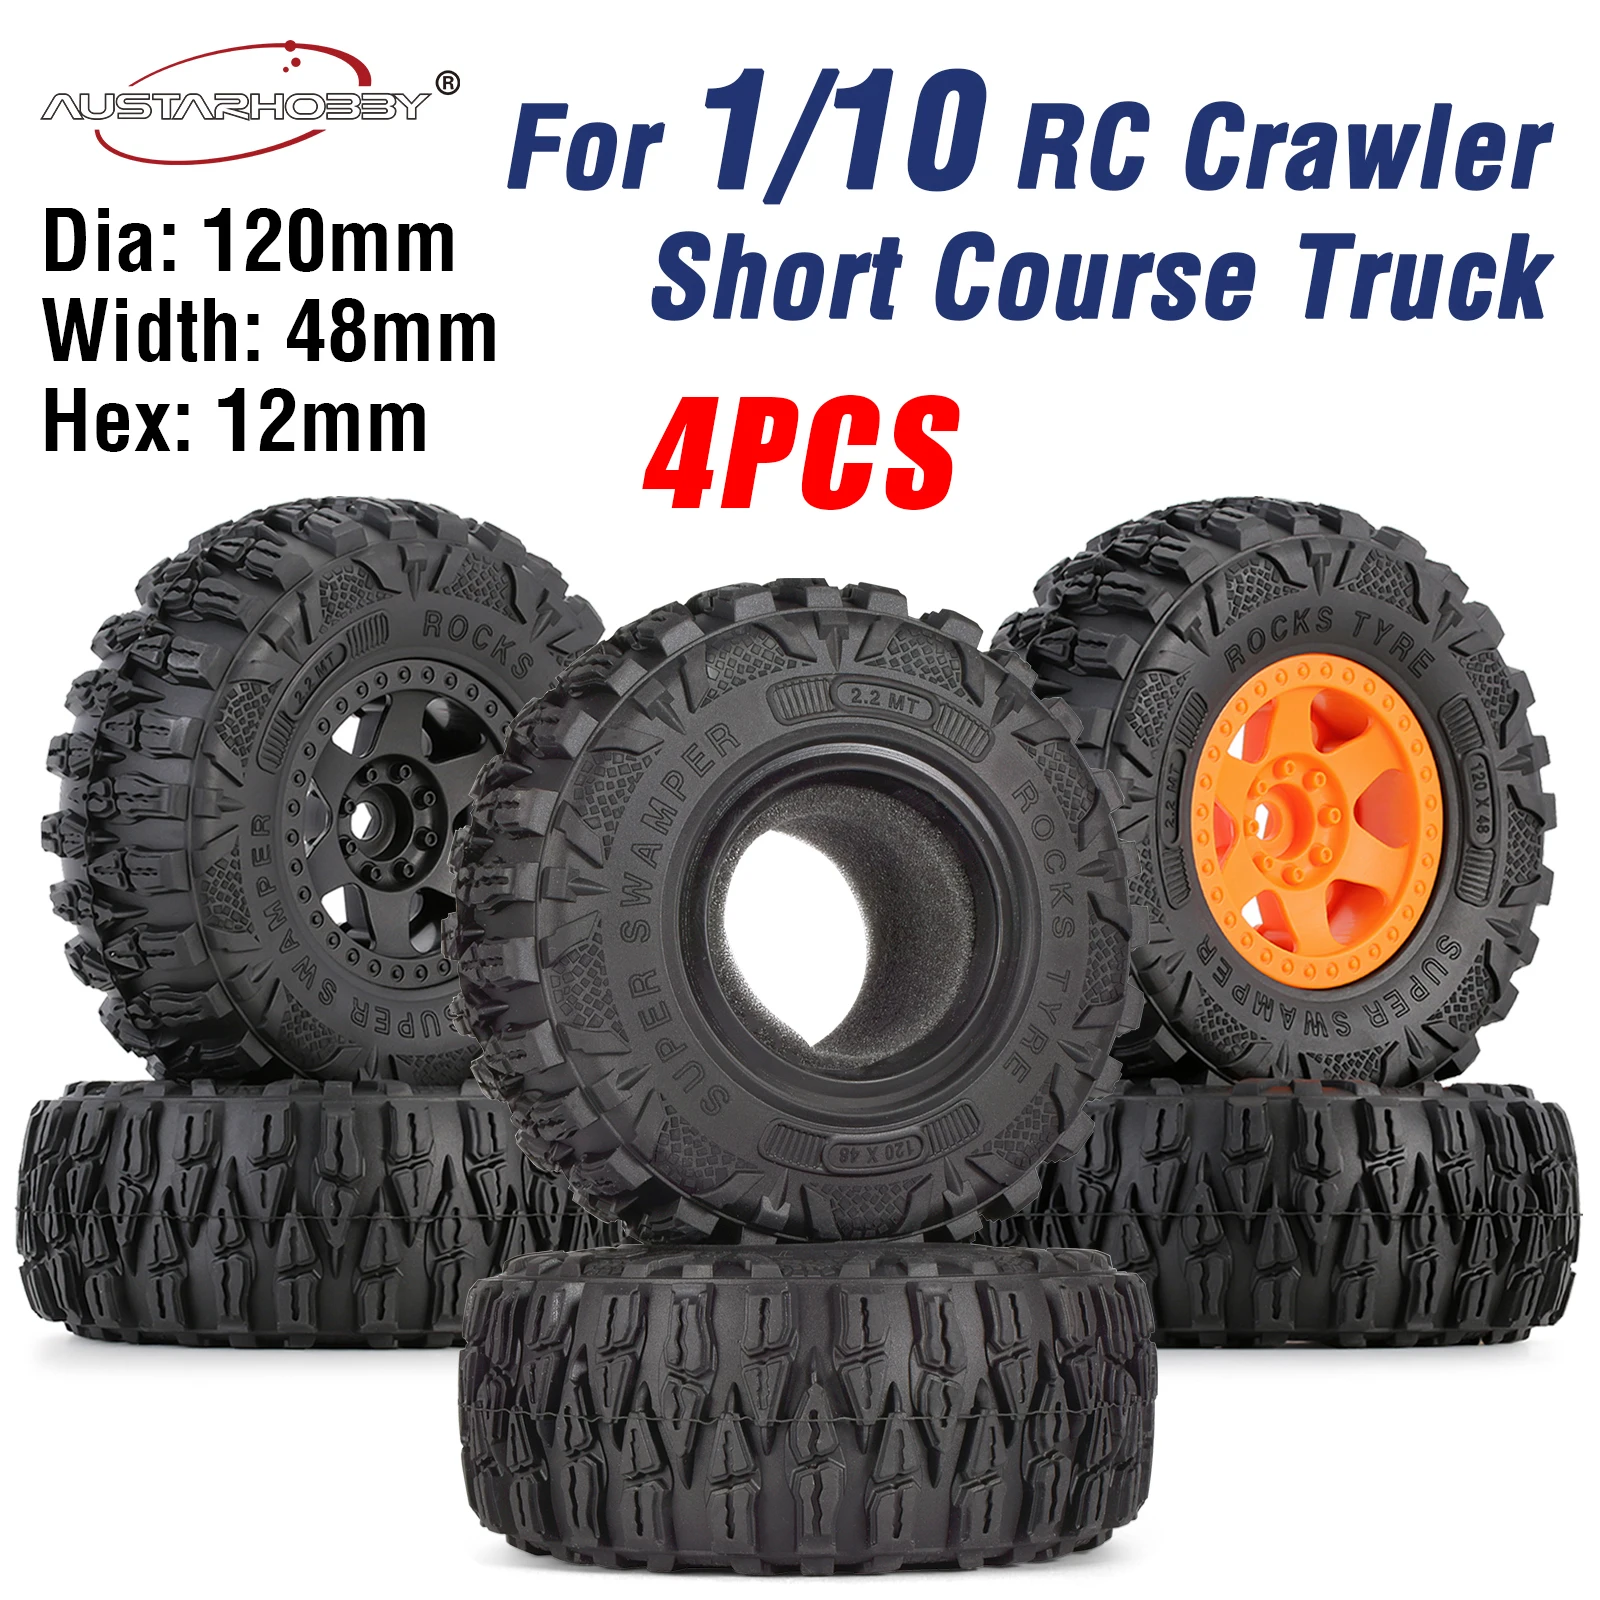 

AUSTARHOBBY 2.2in 1/10 RC Crawler Beadlock Wheels and Tires Rims Set Mud Tire for Axial SCX10 TRX4 TRX-6 Short Course Truck Car